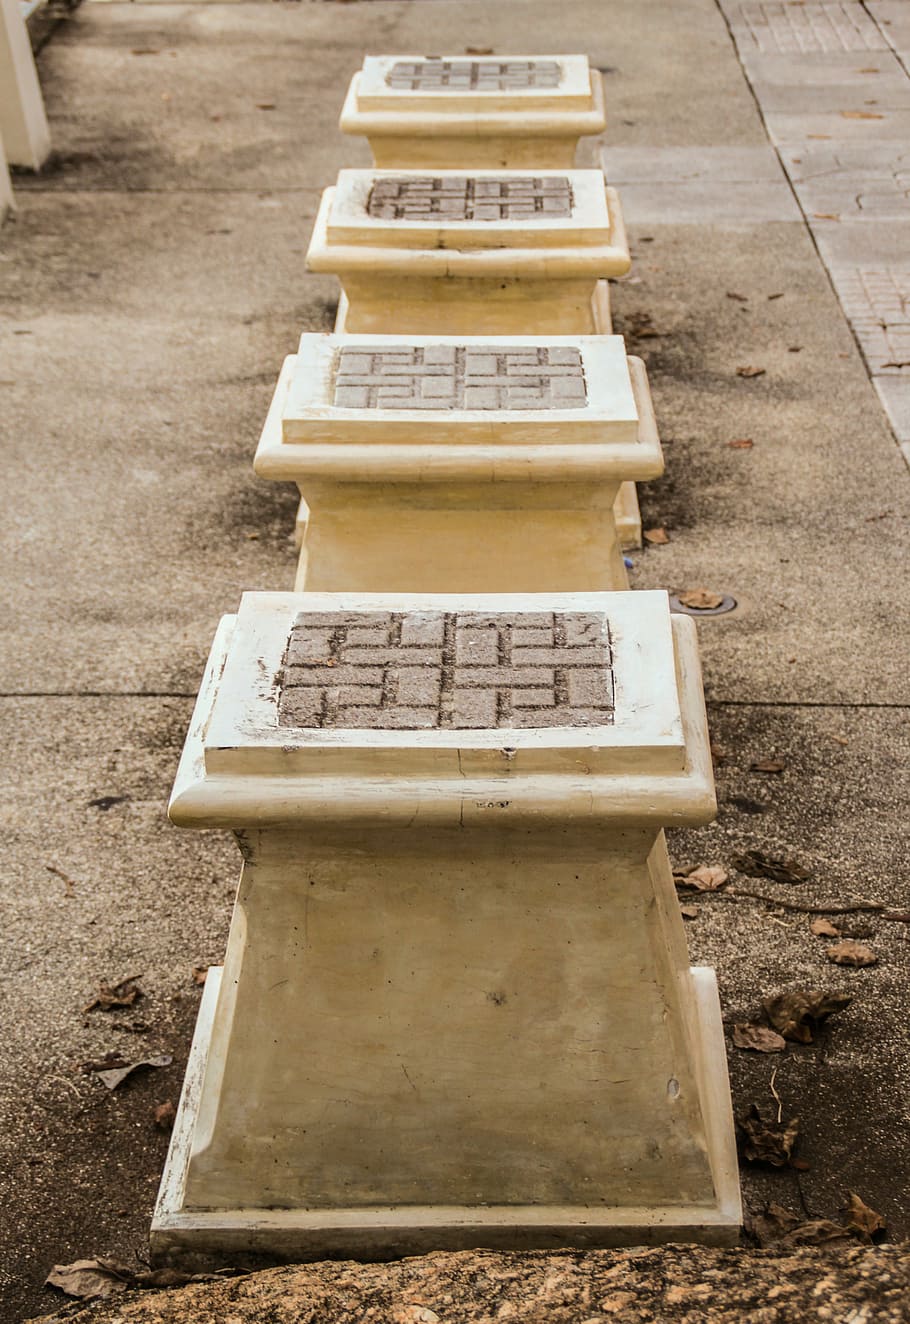 socket, seat, stone, stool, building, day, high angle view, outdoors, in a row, focus on foreground